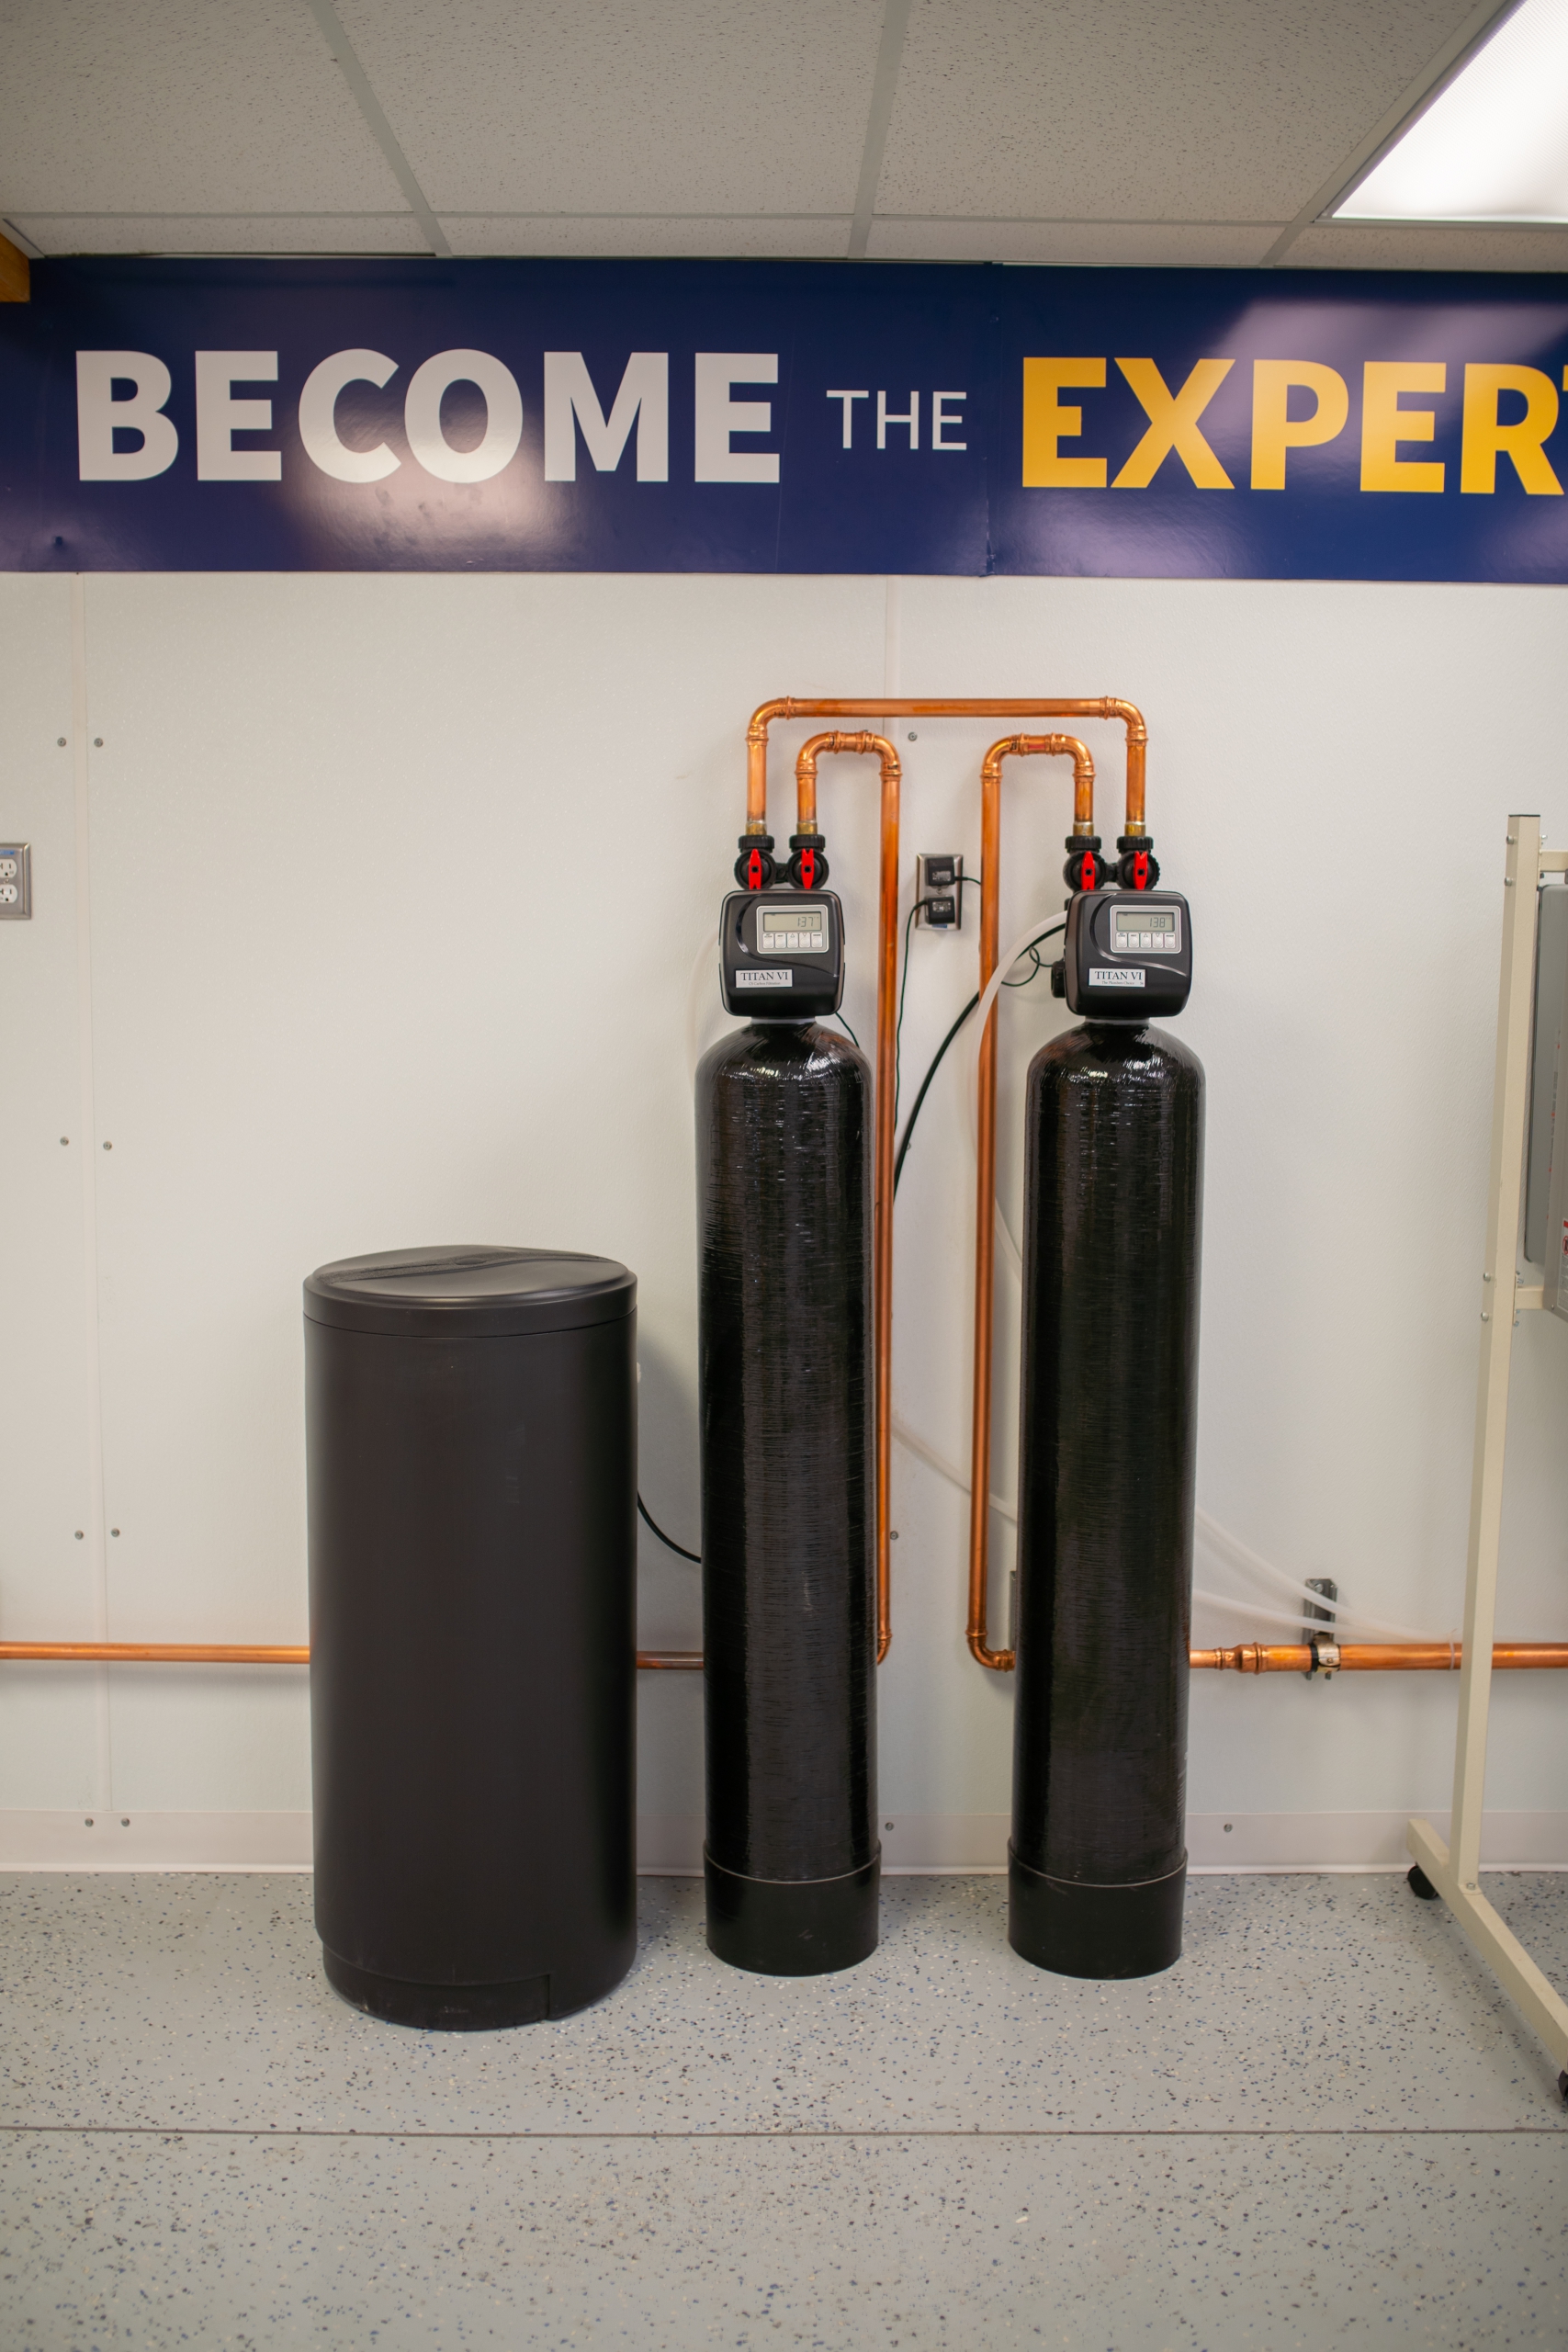 Water Softeners vs Chlorine Filters – Whats the difference?